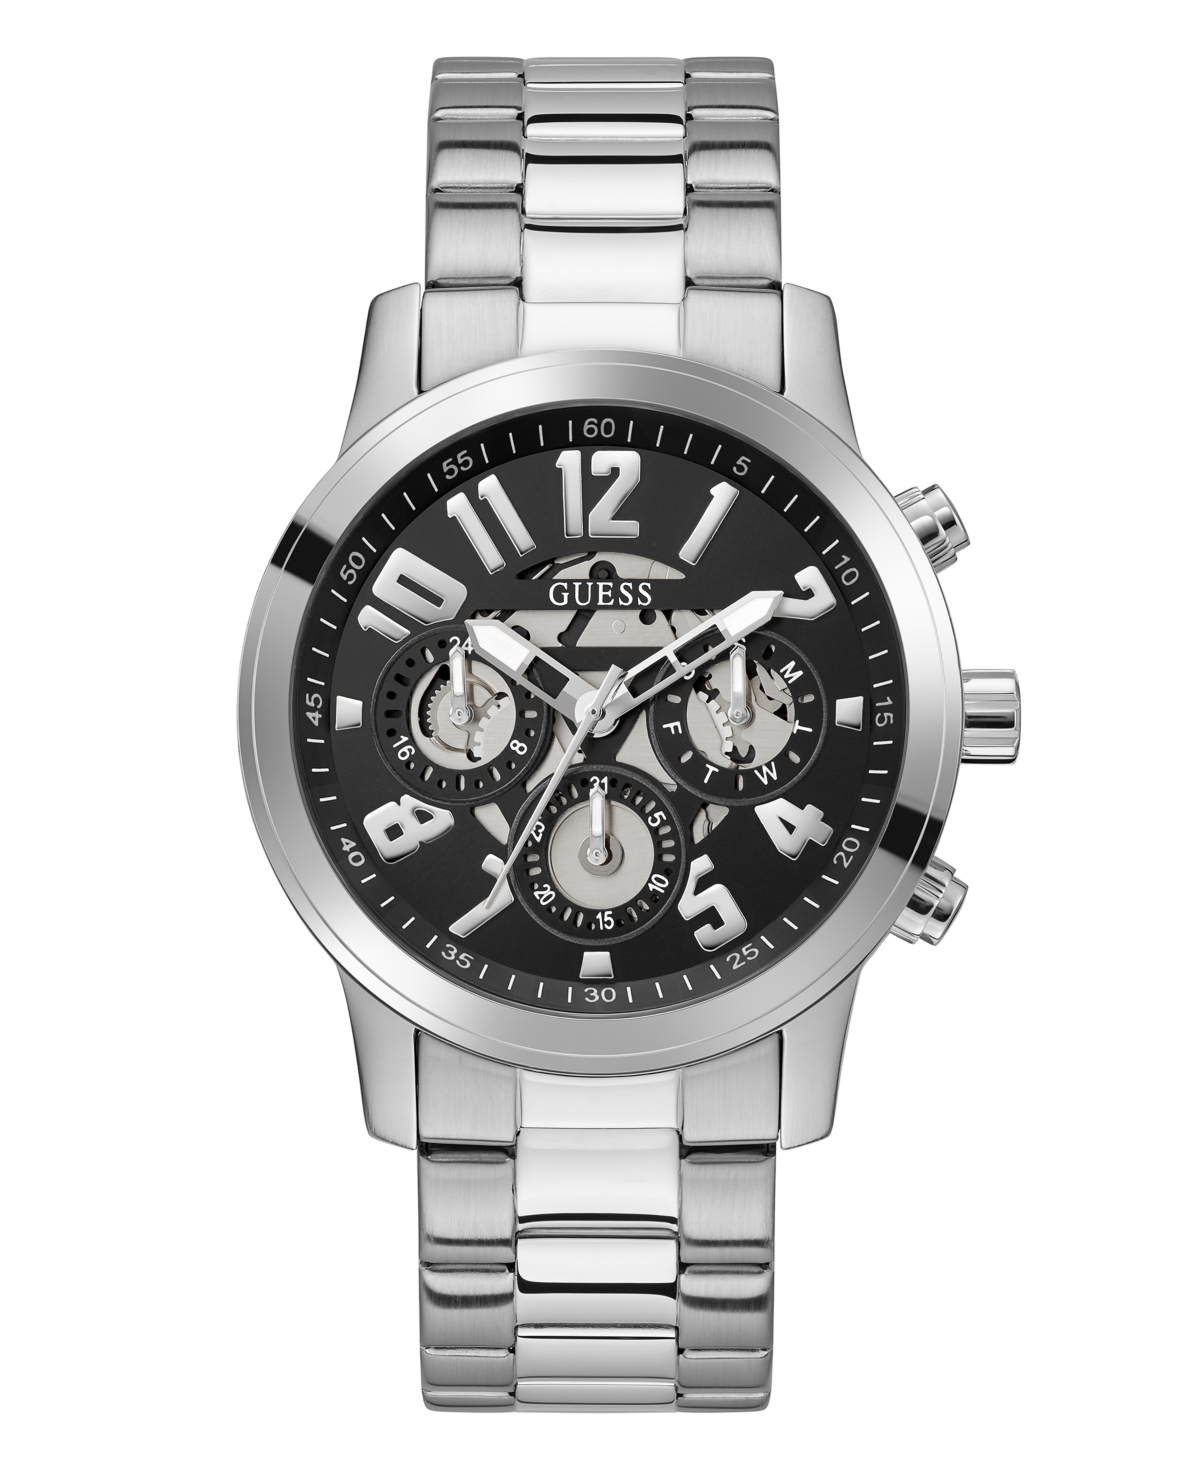 Guess Men's Multi-function Silver-tone Stainless Steel Watch 44mm